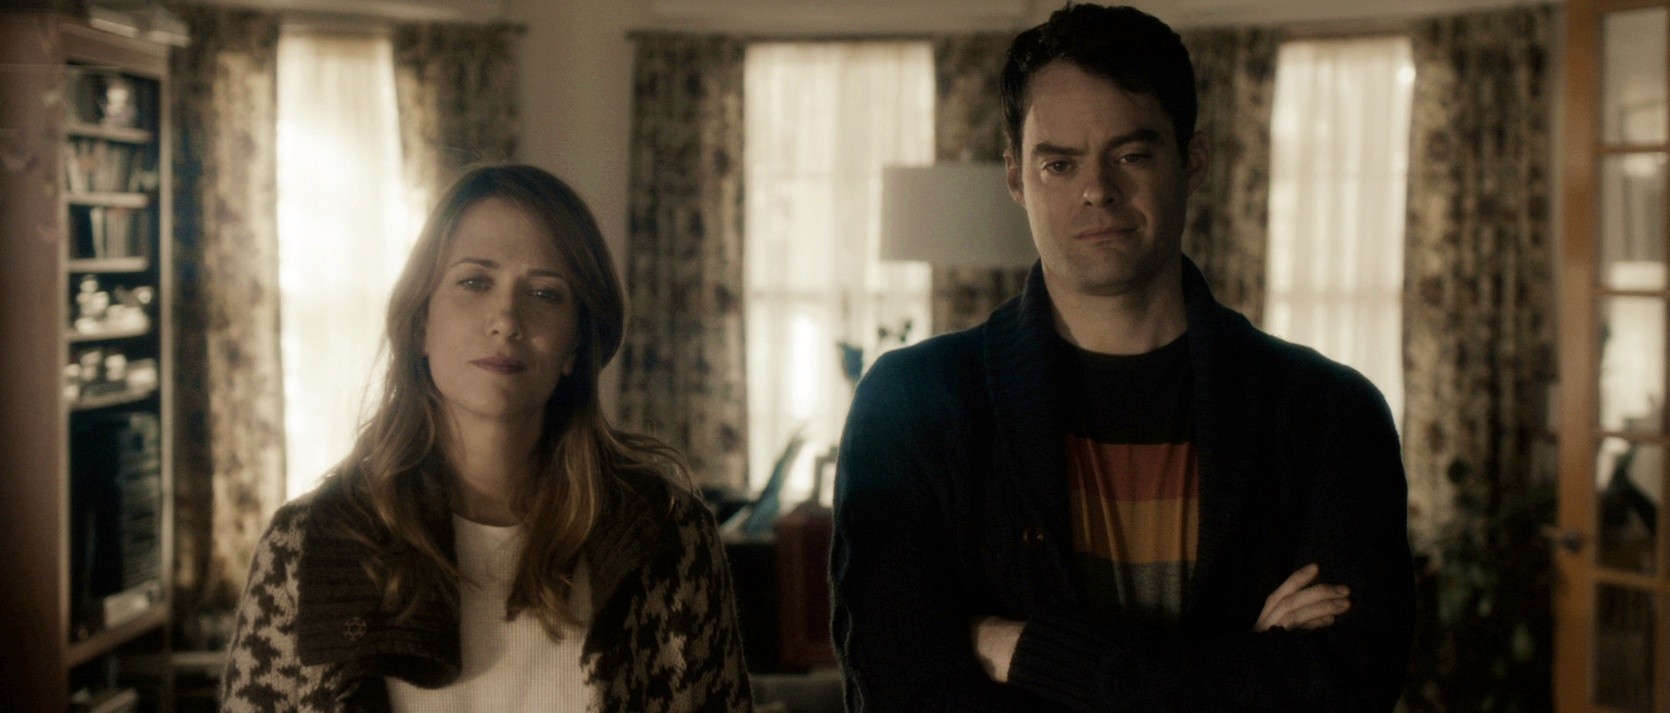 Kristen Wiig stars as Maggie and Ty Burrell stars as Rich in Roadside Attractions' The Skeleton Twins (2014)